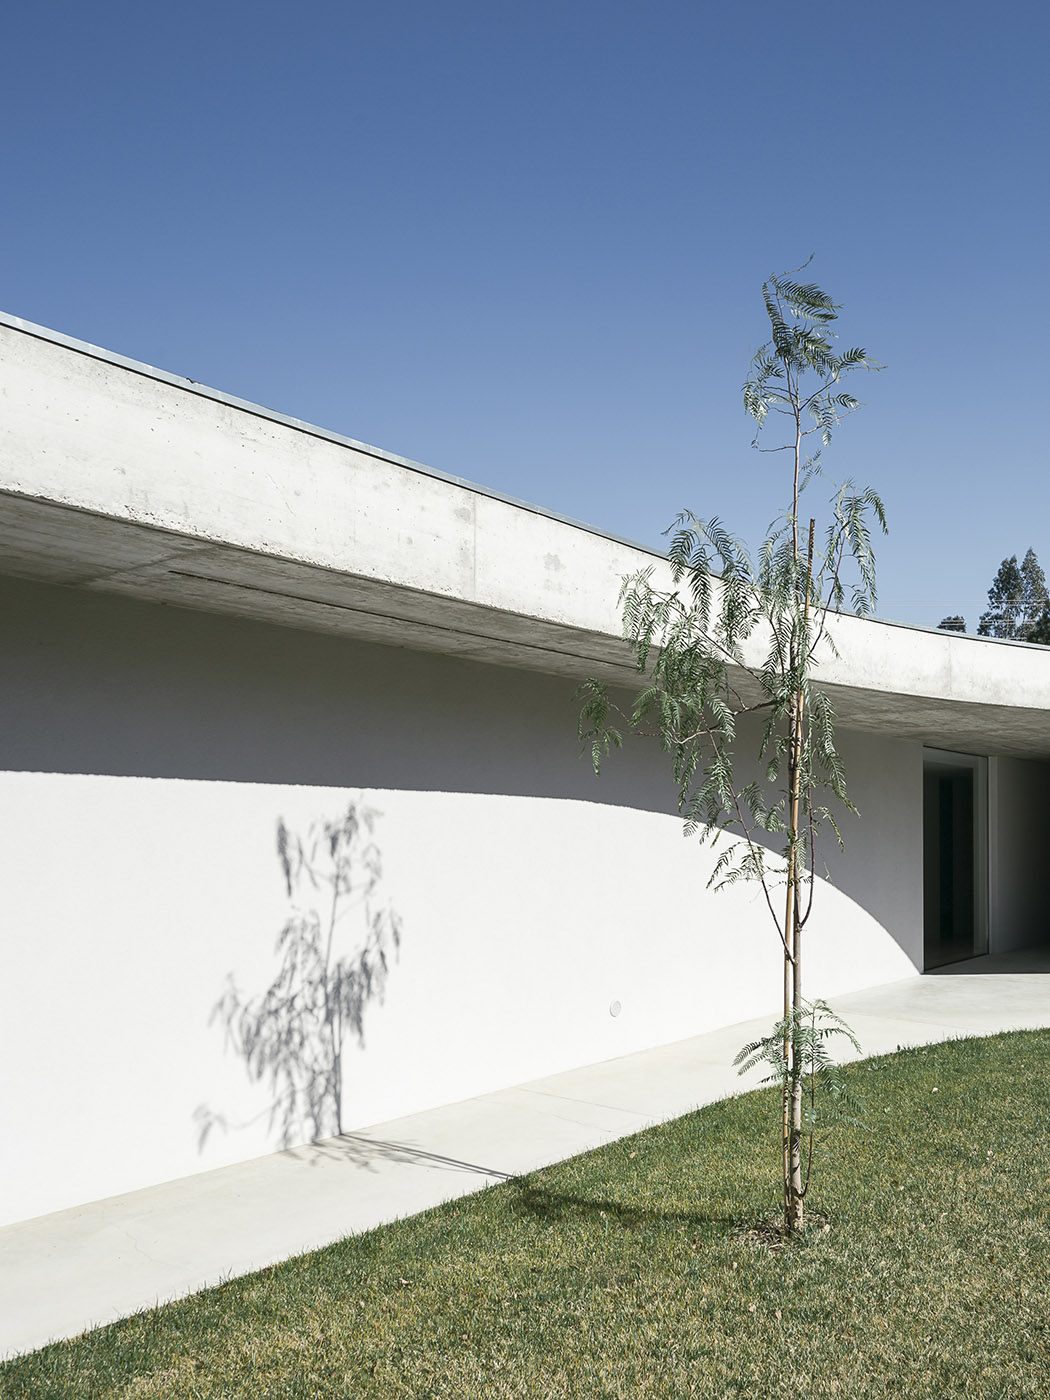 Gloma House, two organically shaped cement slabs define the architecture